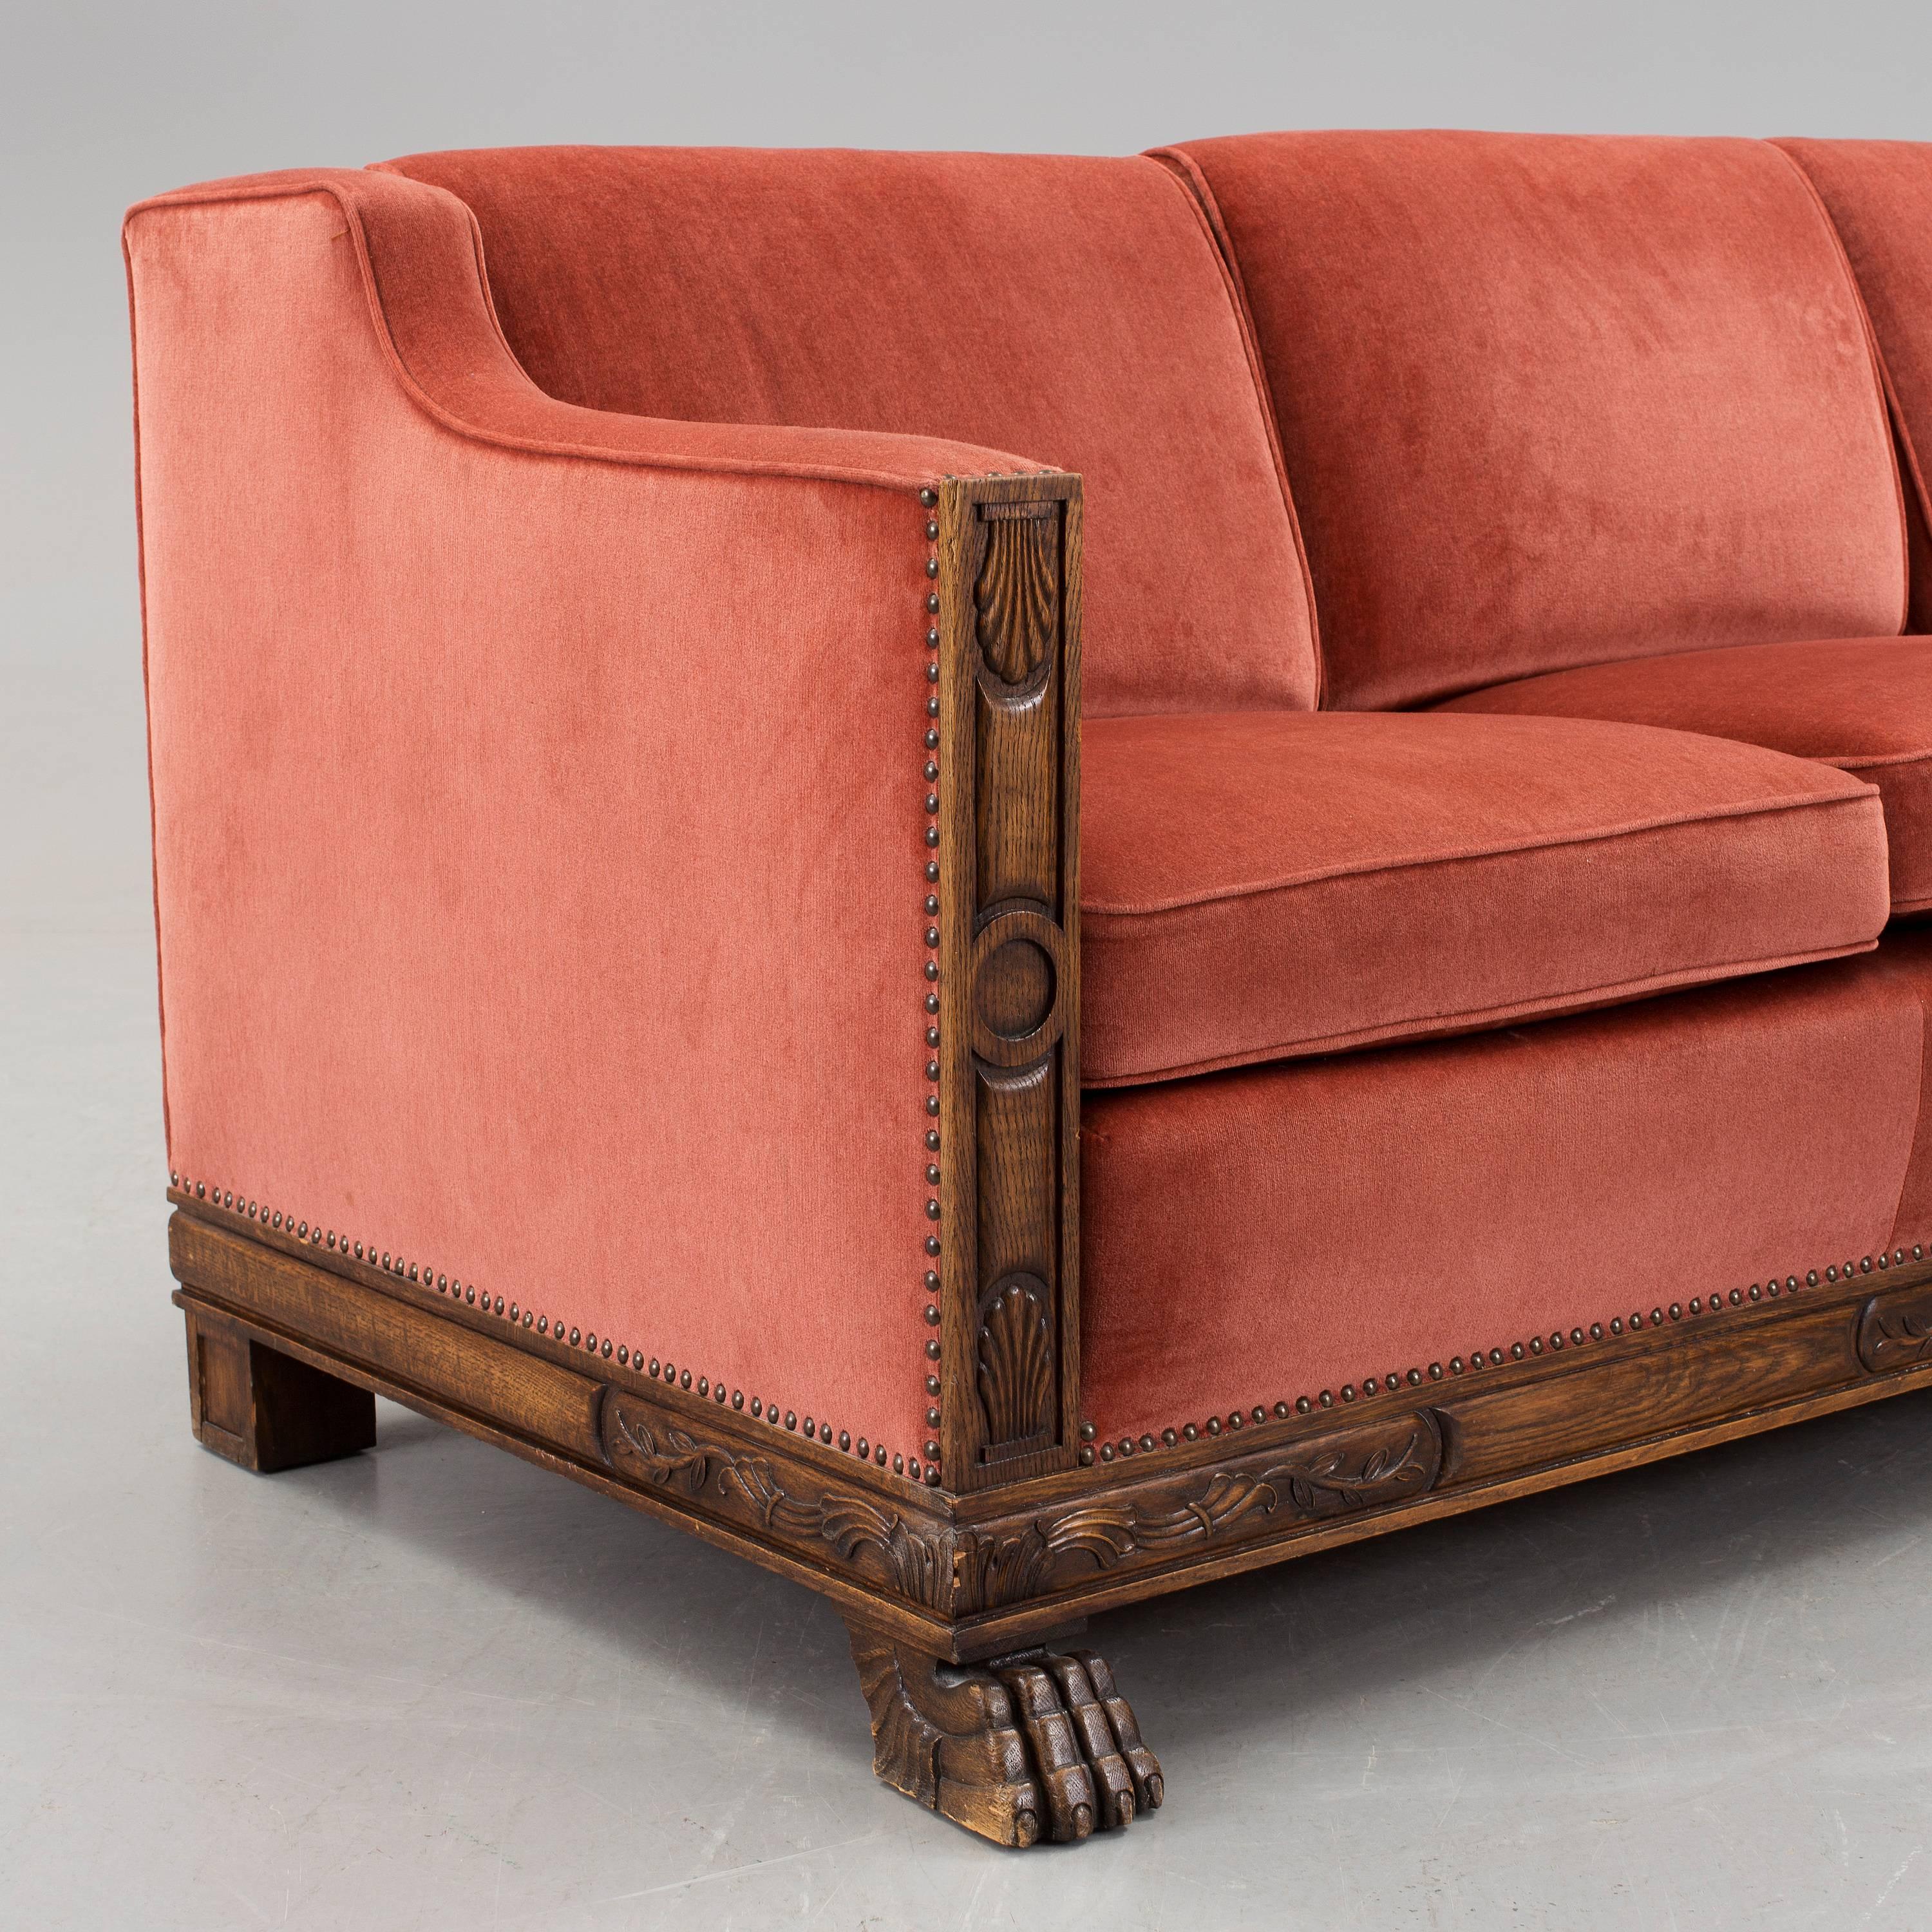 Swedish Art Deco era sofa by Axel Einar Hjorth for SMF, Bodafors. Frame in solid birch with oak facing and oak animal feet. Recently recovered in rose colored velvet which is in excellent condition, Sweden, 1920.